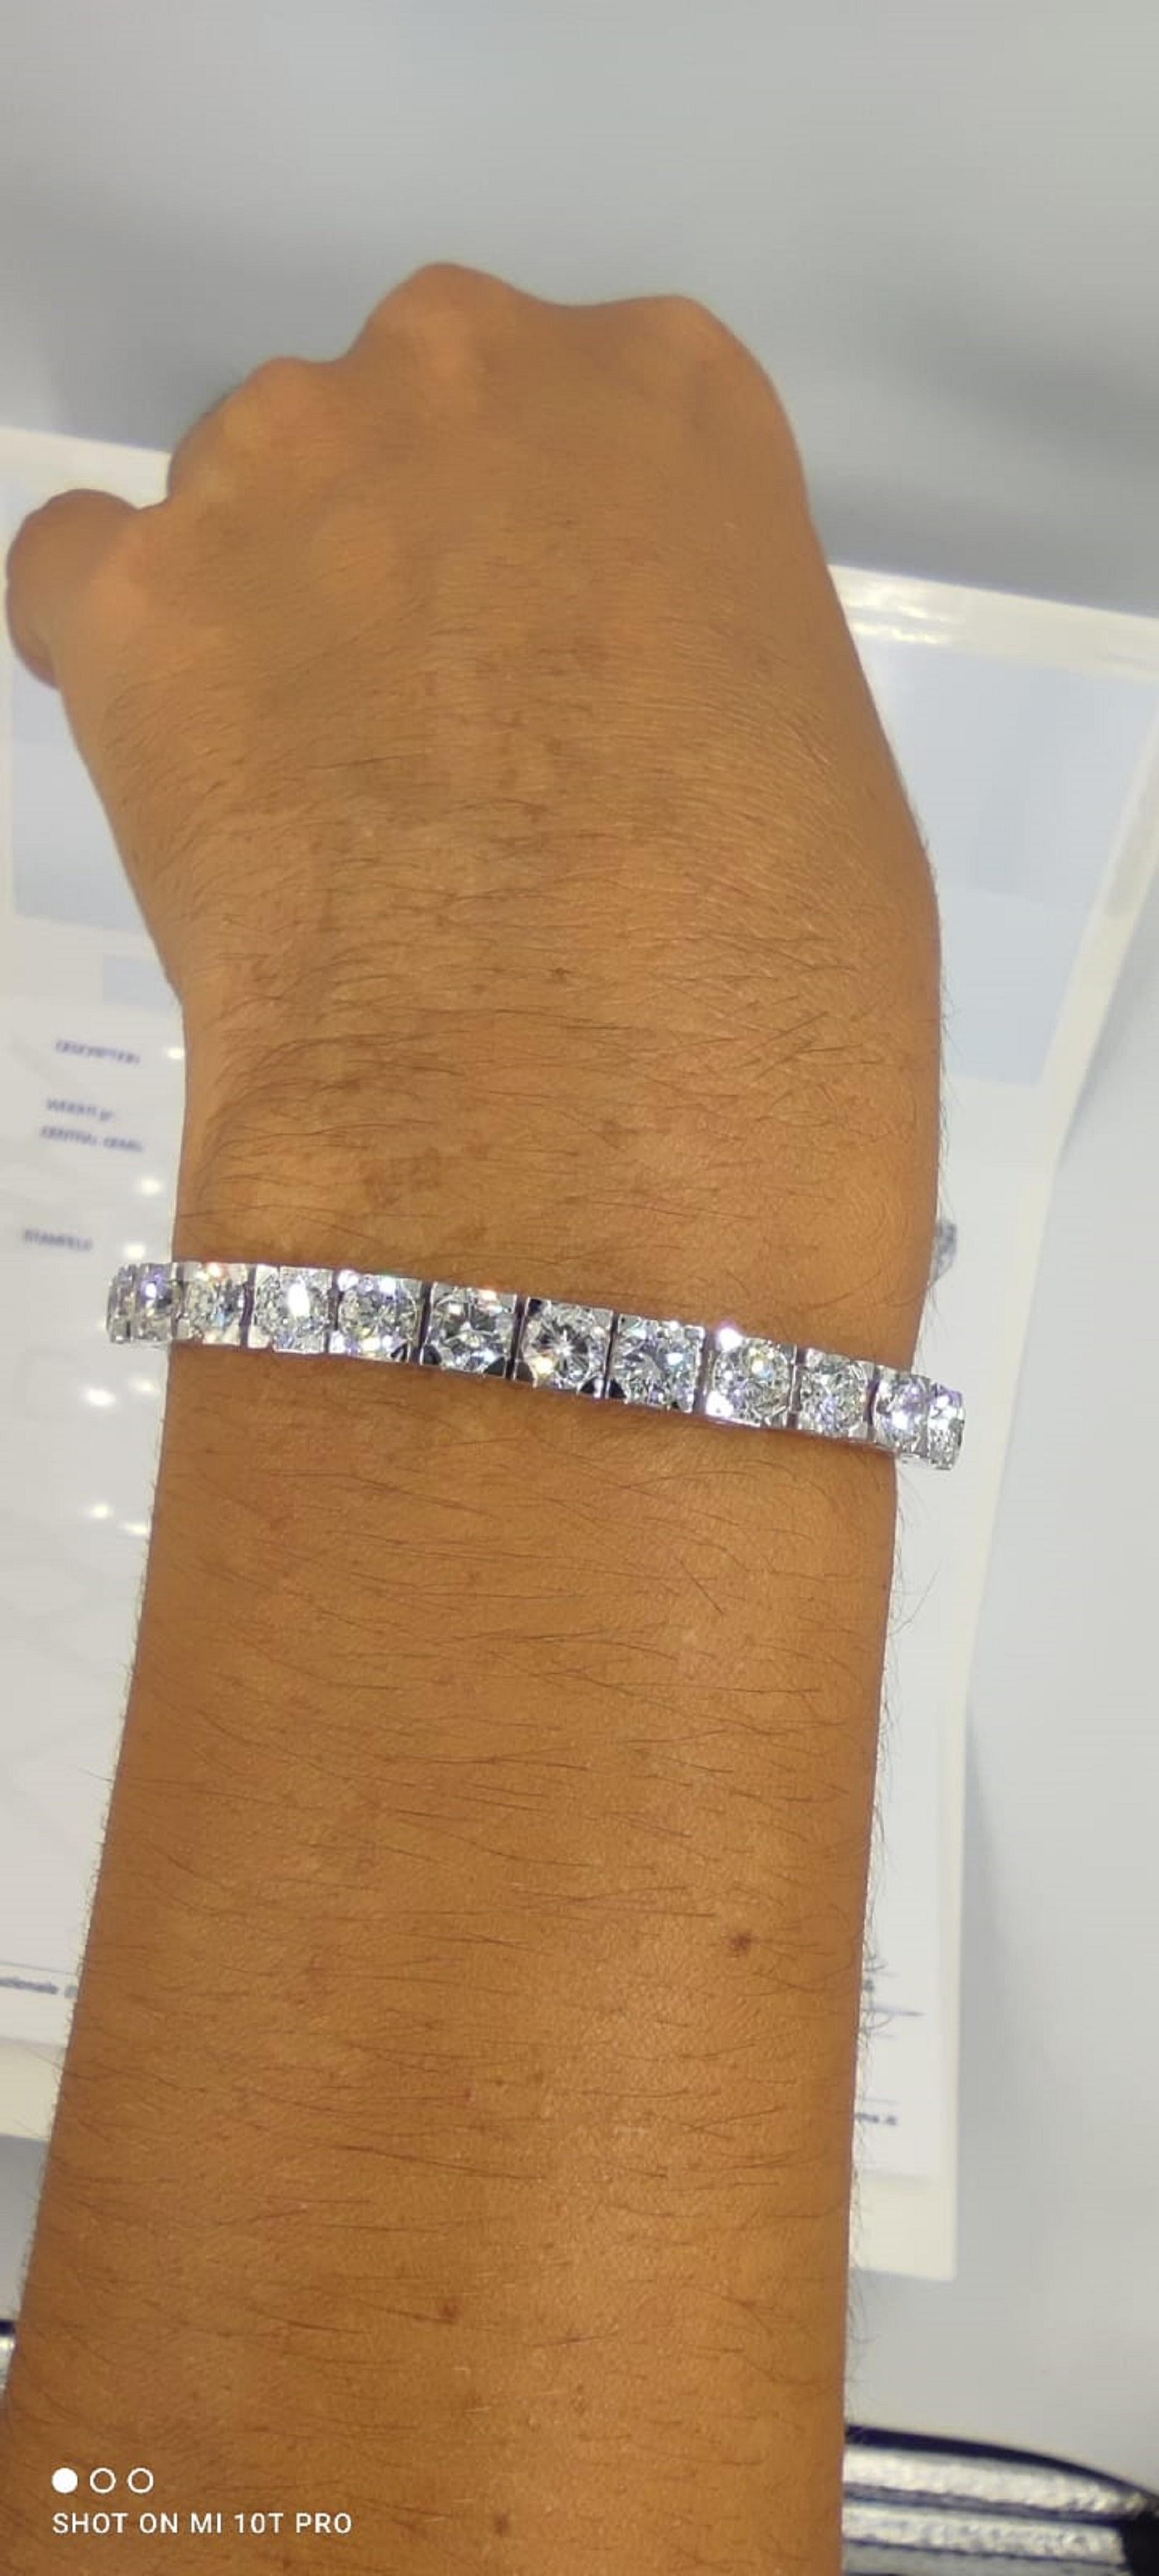 Made in Italy 13 Carat Round Cut Diamond Emerald Cut Diamonds Tennis Bracelet In Excellent Condition For Sale In Rome, IT